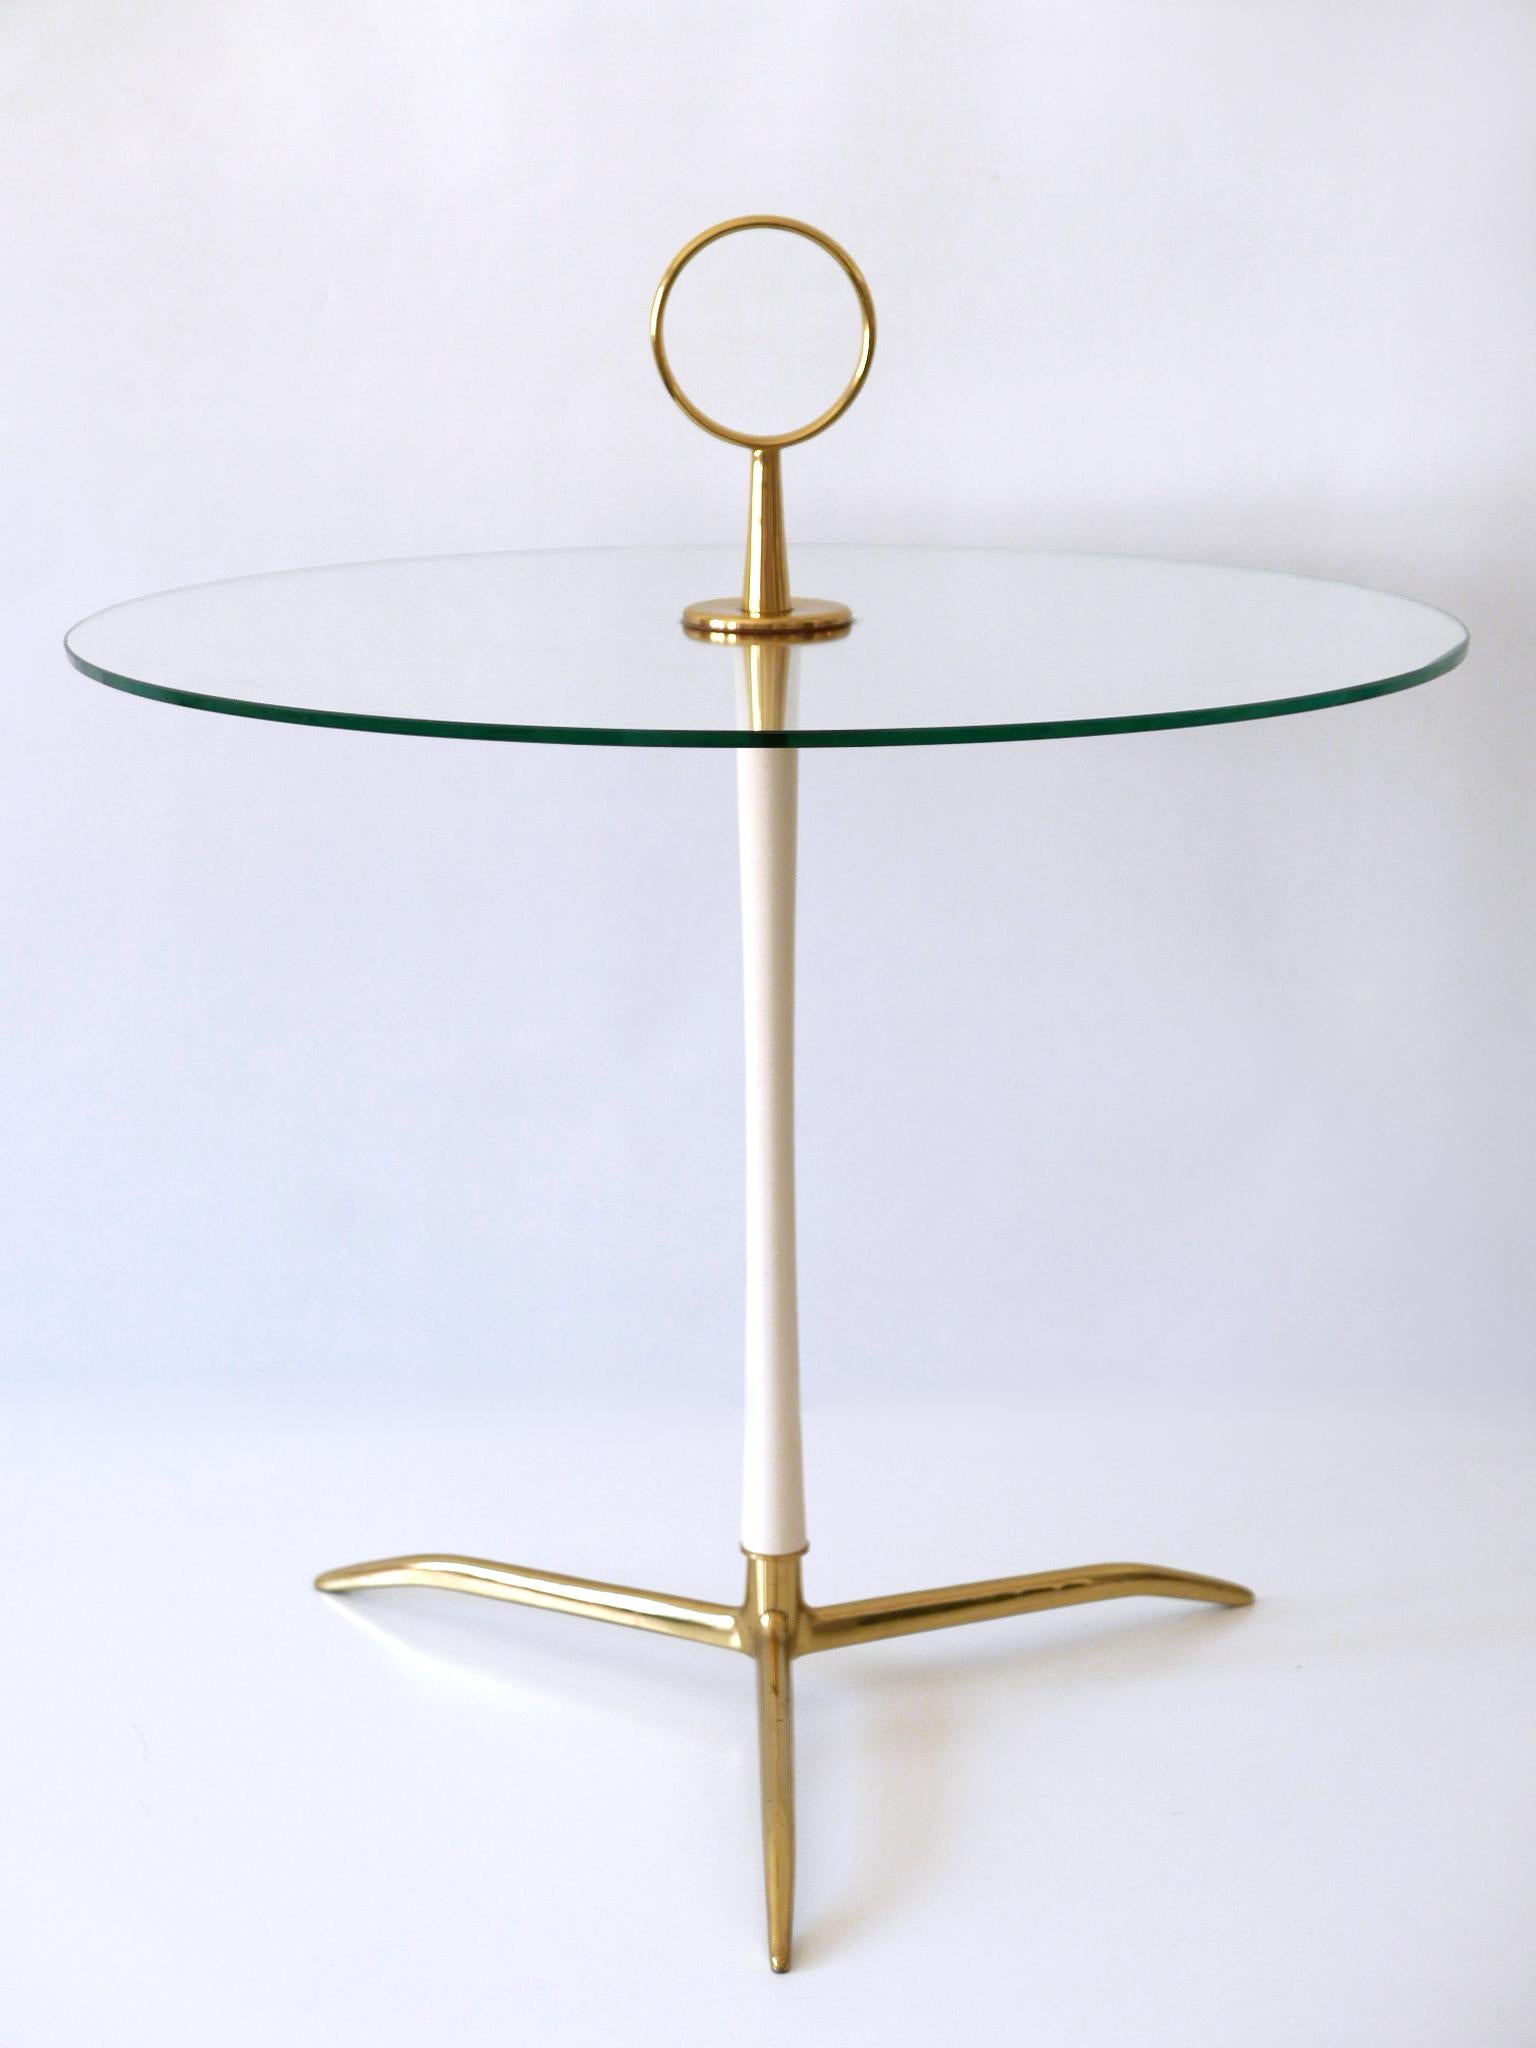 Extremely rare and elegant Mid-Century Modern tripod side table. Designed and manufactured by Vereinigte Werkstätten München, Germany, 1950s.

Executed in glass and brass; polished and partly enameled.

Condition:
Good original vintage condition.